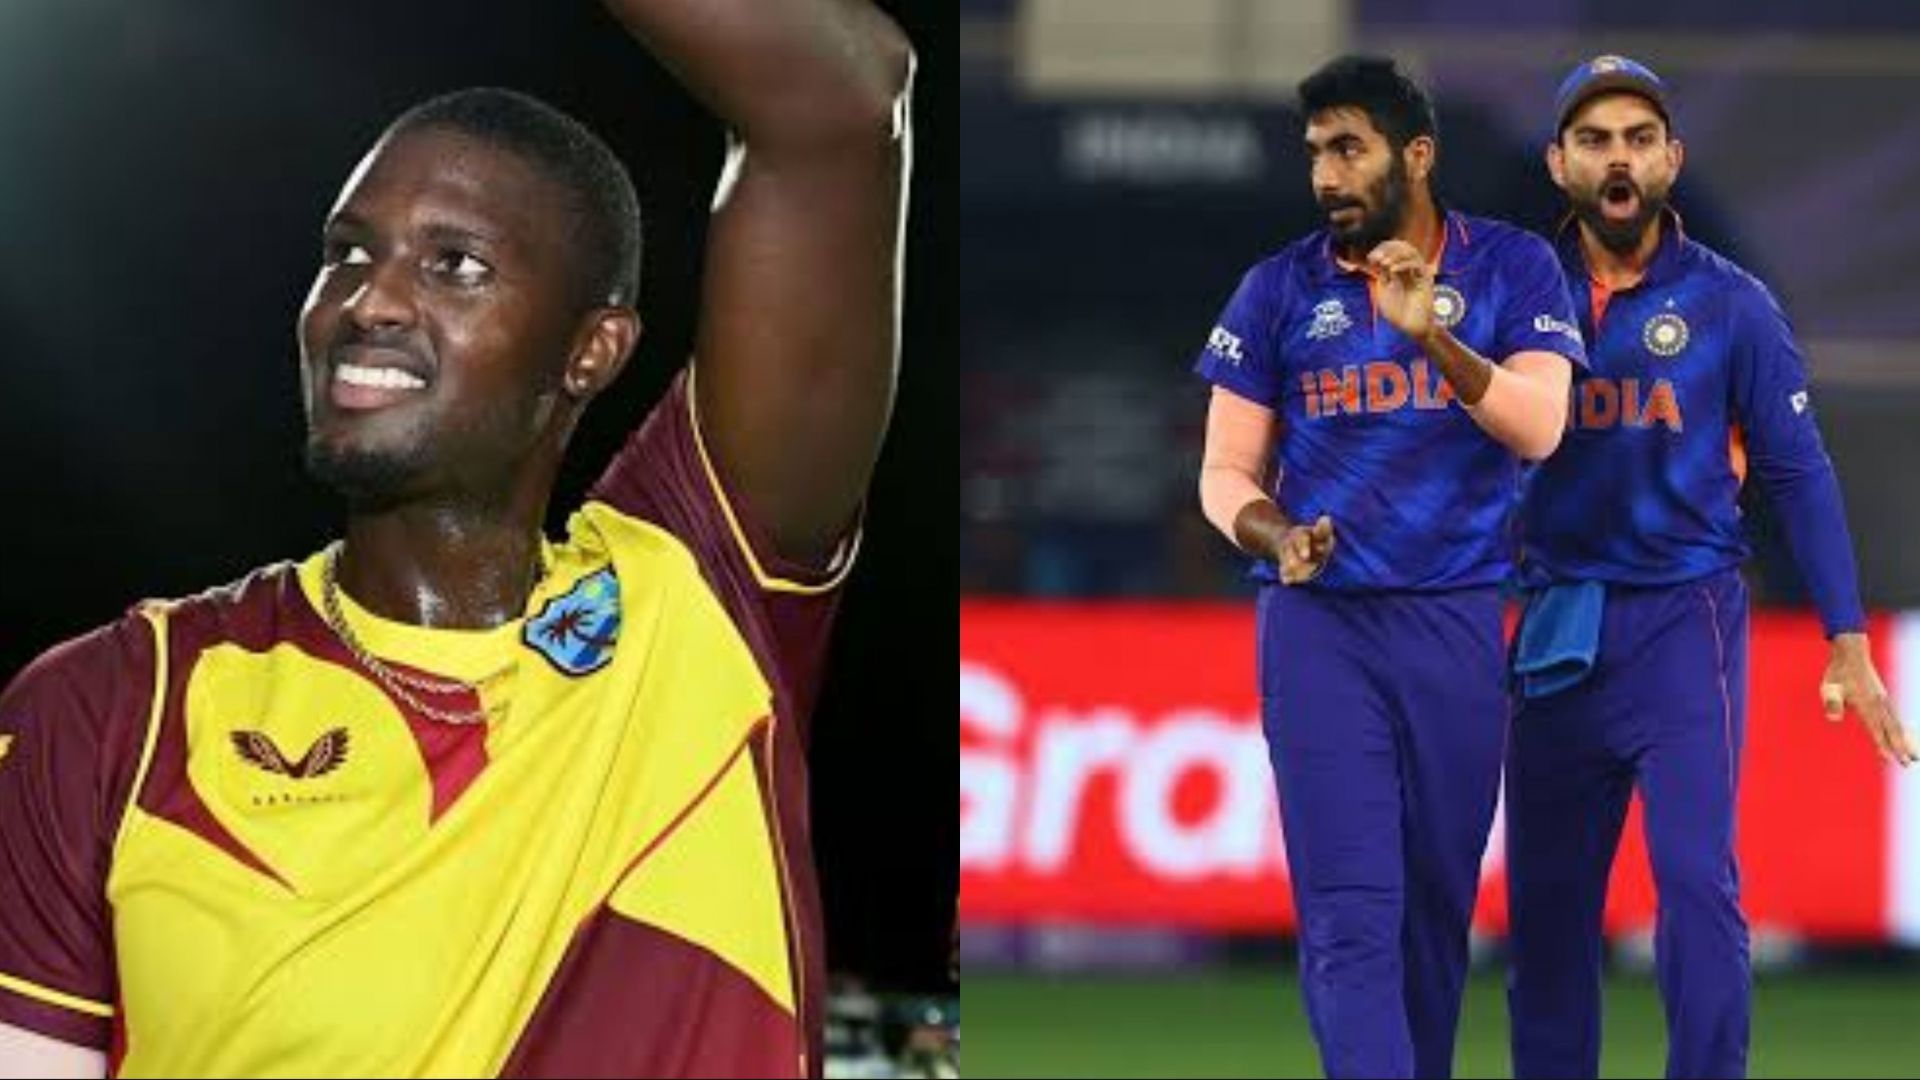 Jason Holder (L) and Jasprit Bumrah are two of the top T20I bowlers in the world